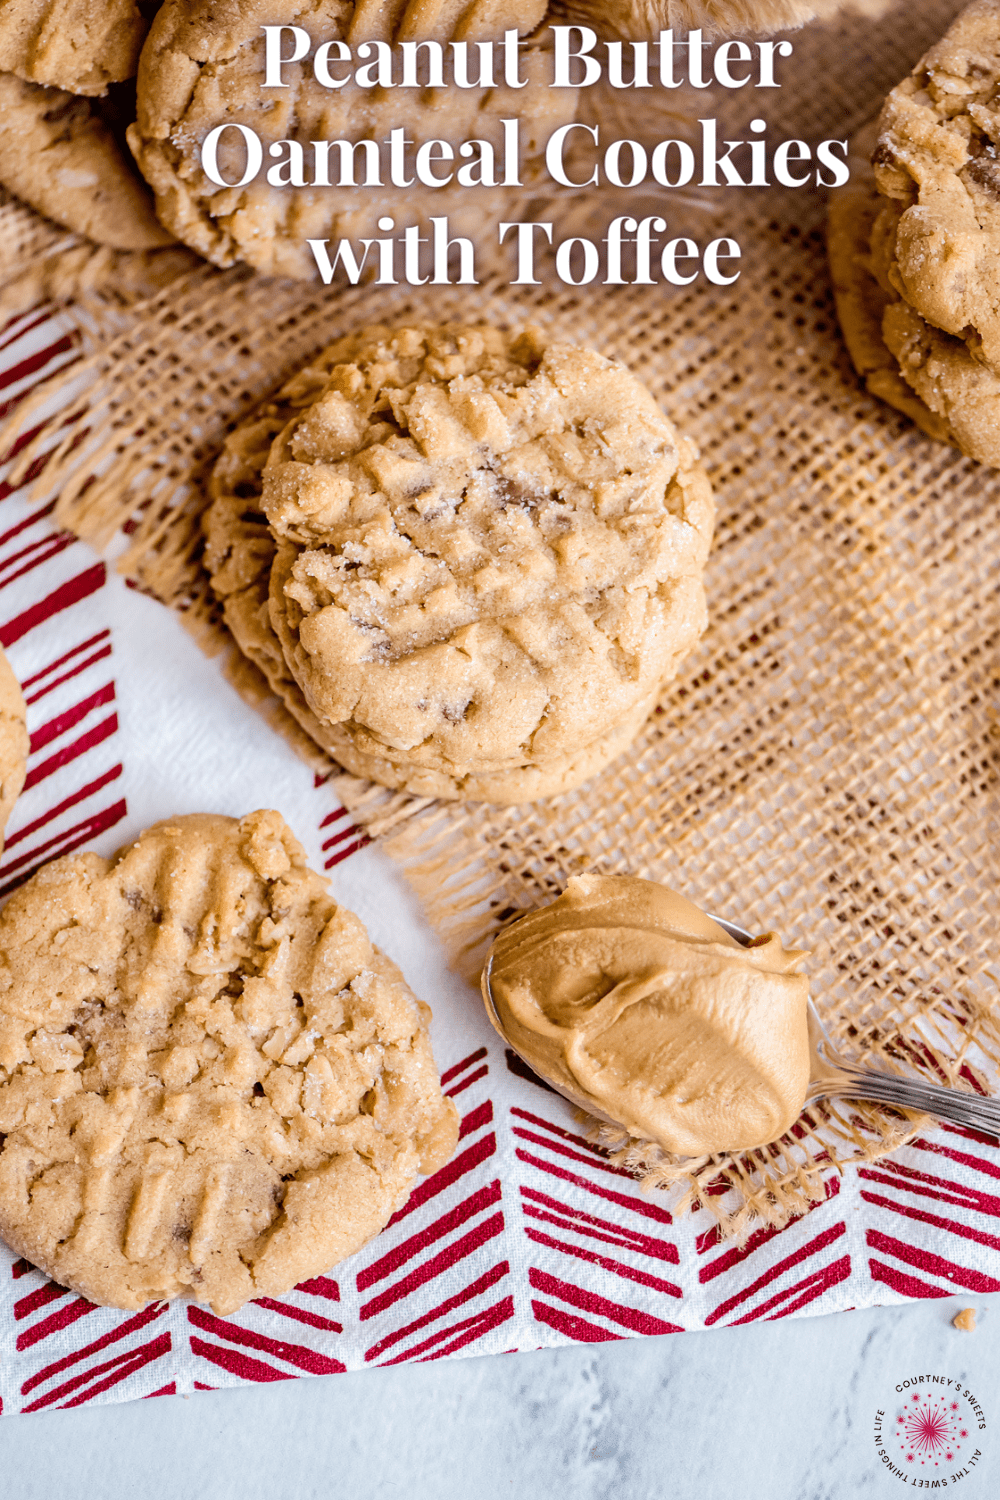 Peanut butter oatmea cookies on a piece of burlap with text on image for pinterest.